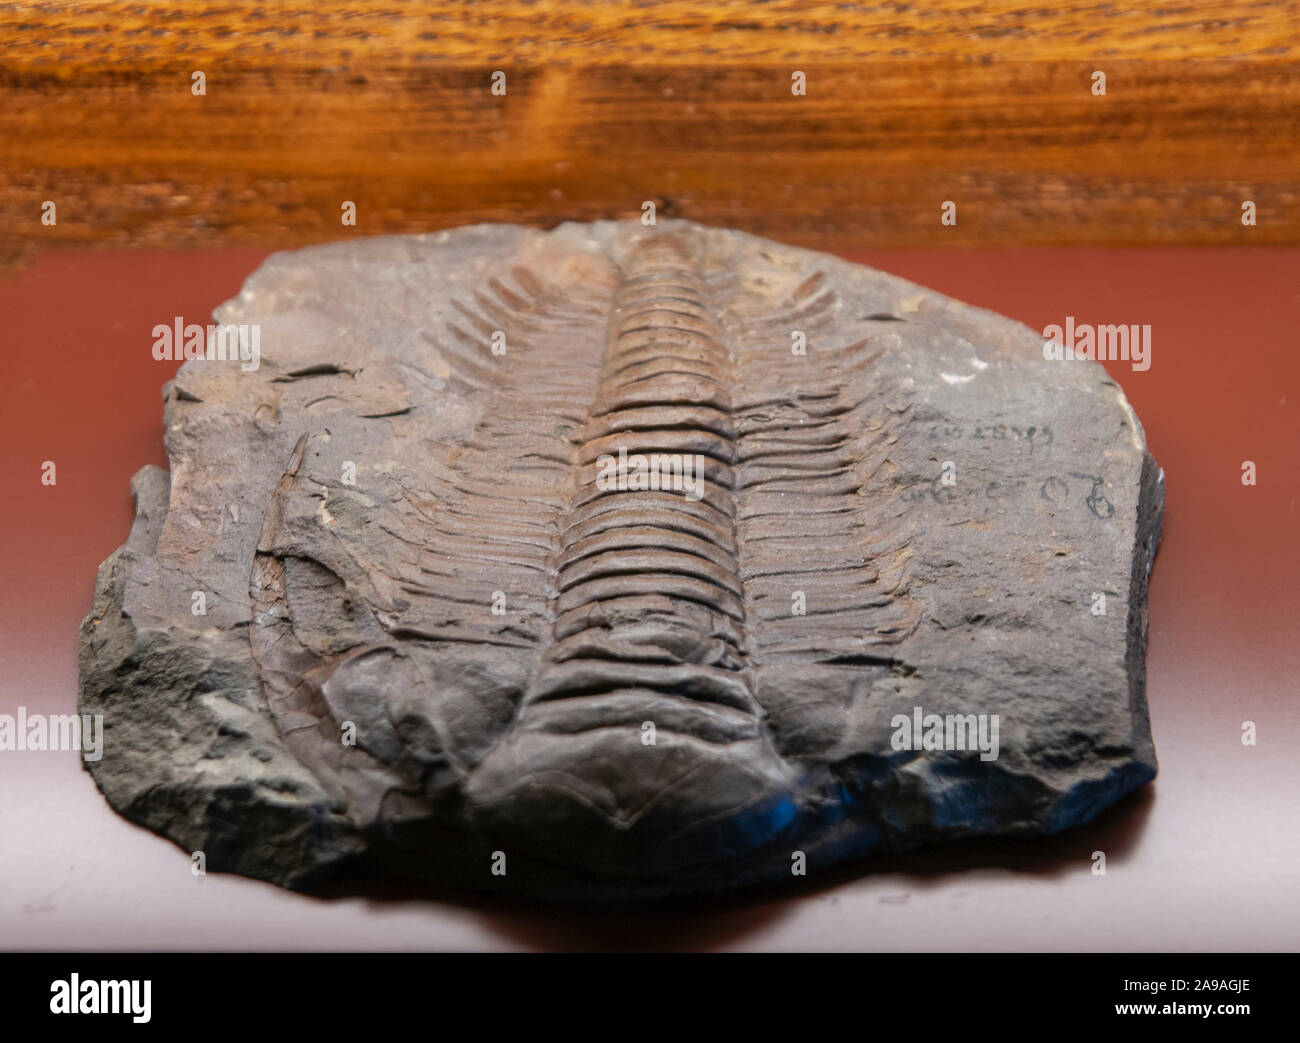 Paradoxides Bohemicus fossil. Paradoxides is a genus of large to very large trilobites found throughout the world during the Mid Cambrian period. Phot Stock Photo